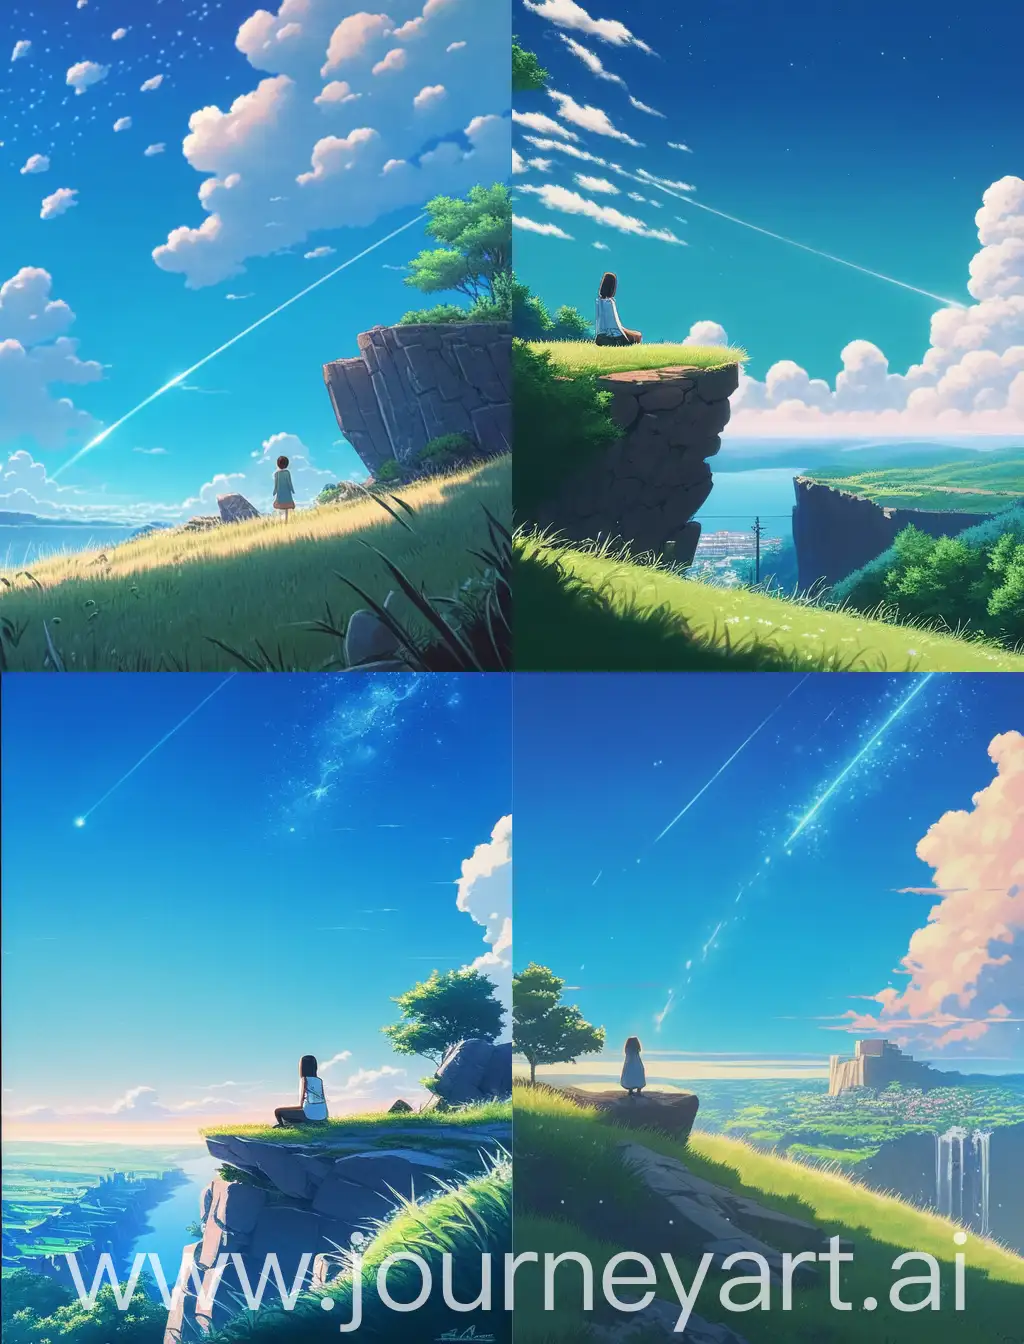 Woman-Admiring-Meteor-in-Vibrant-Sky-on-Cliff-Edge-Overlooking-City-Anime-Movie-Poster